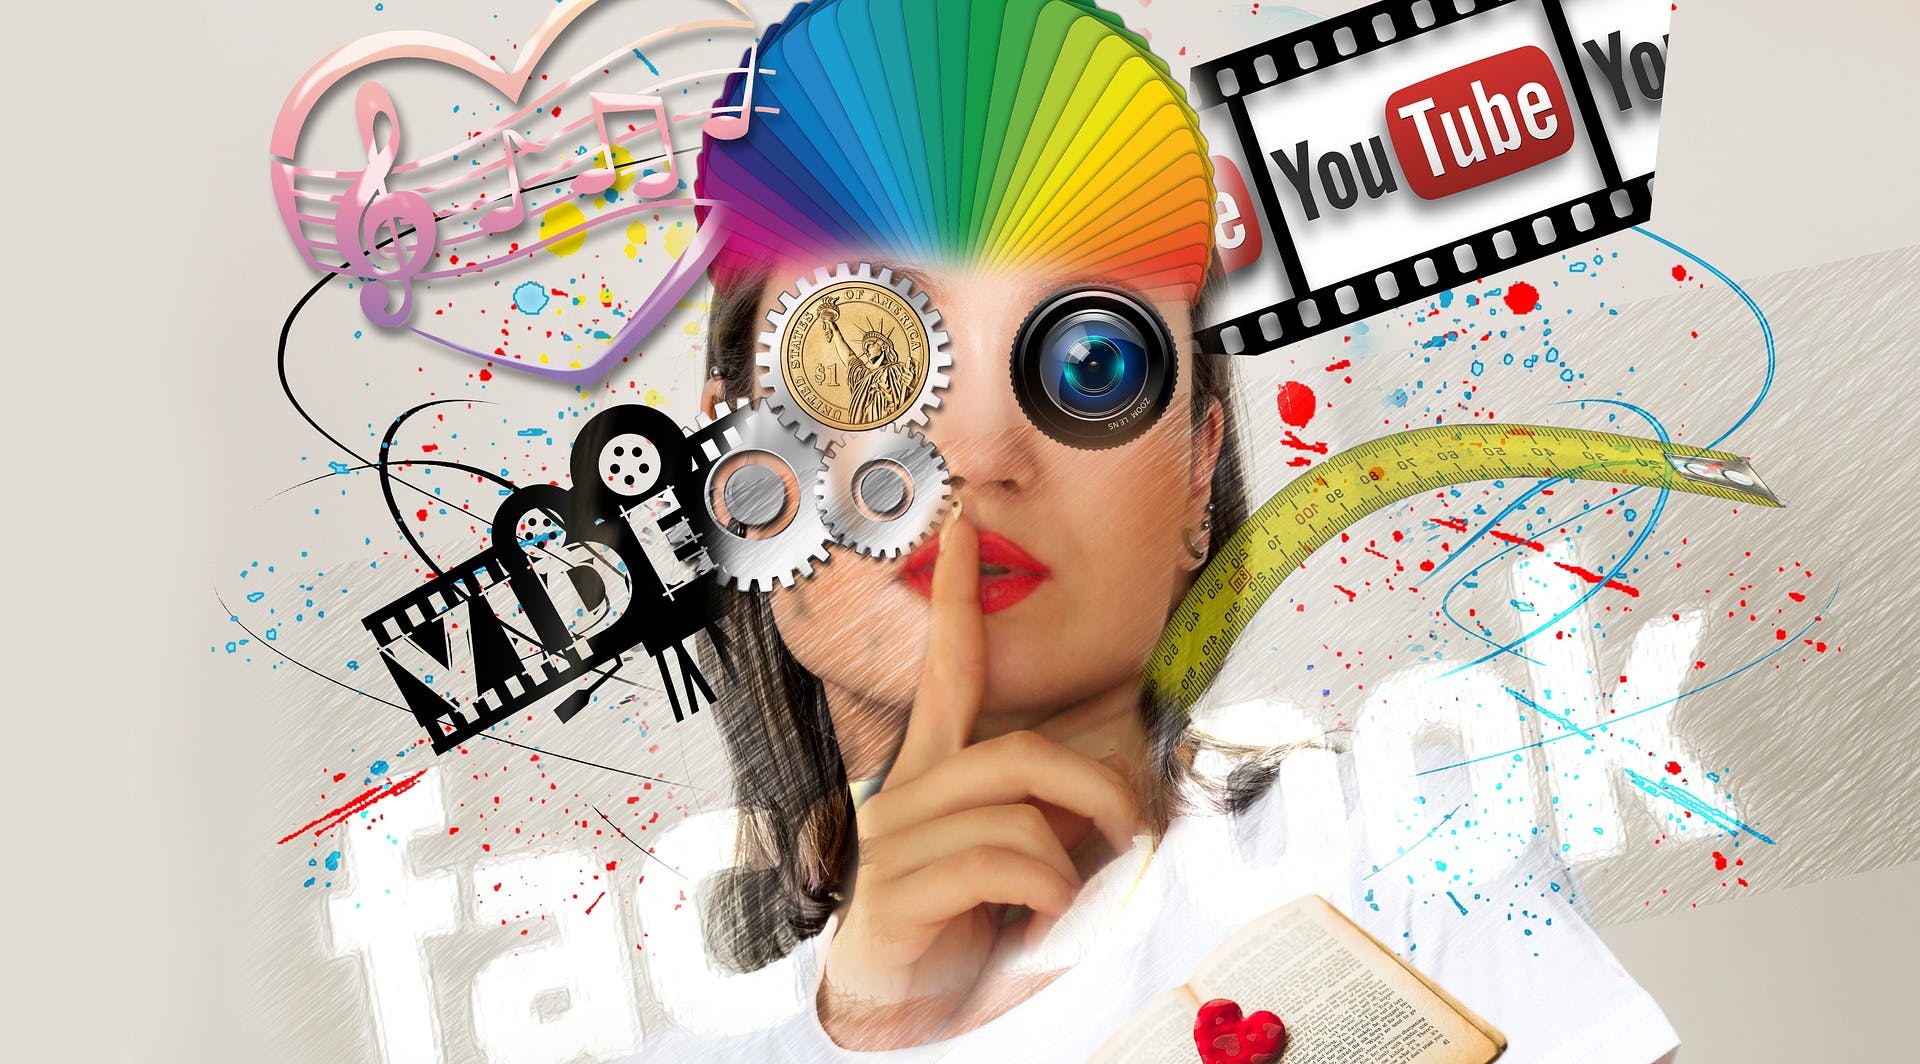 Various social media logo's and girl in the middle